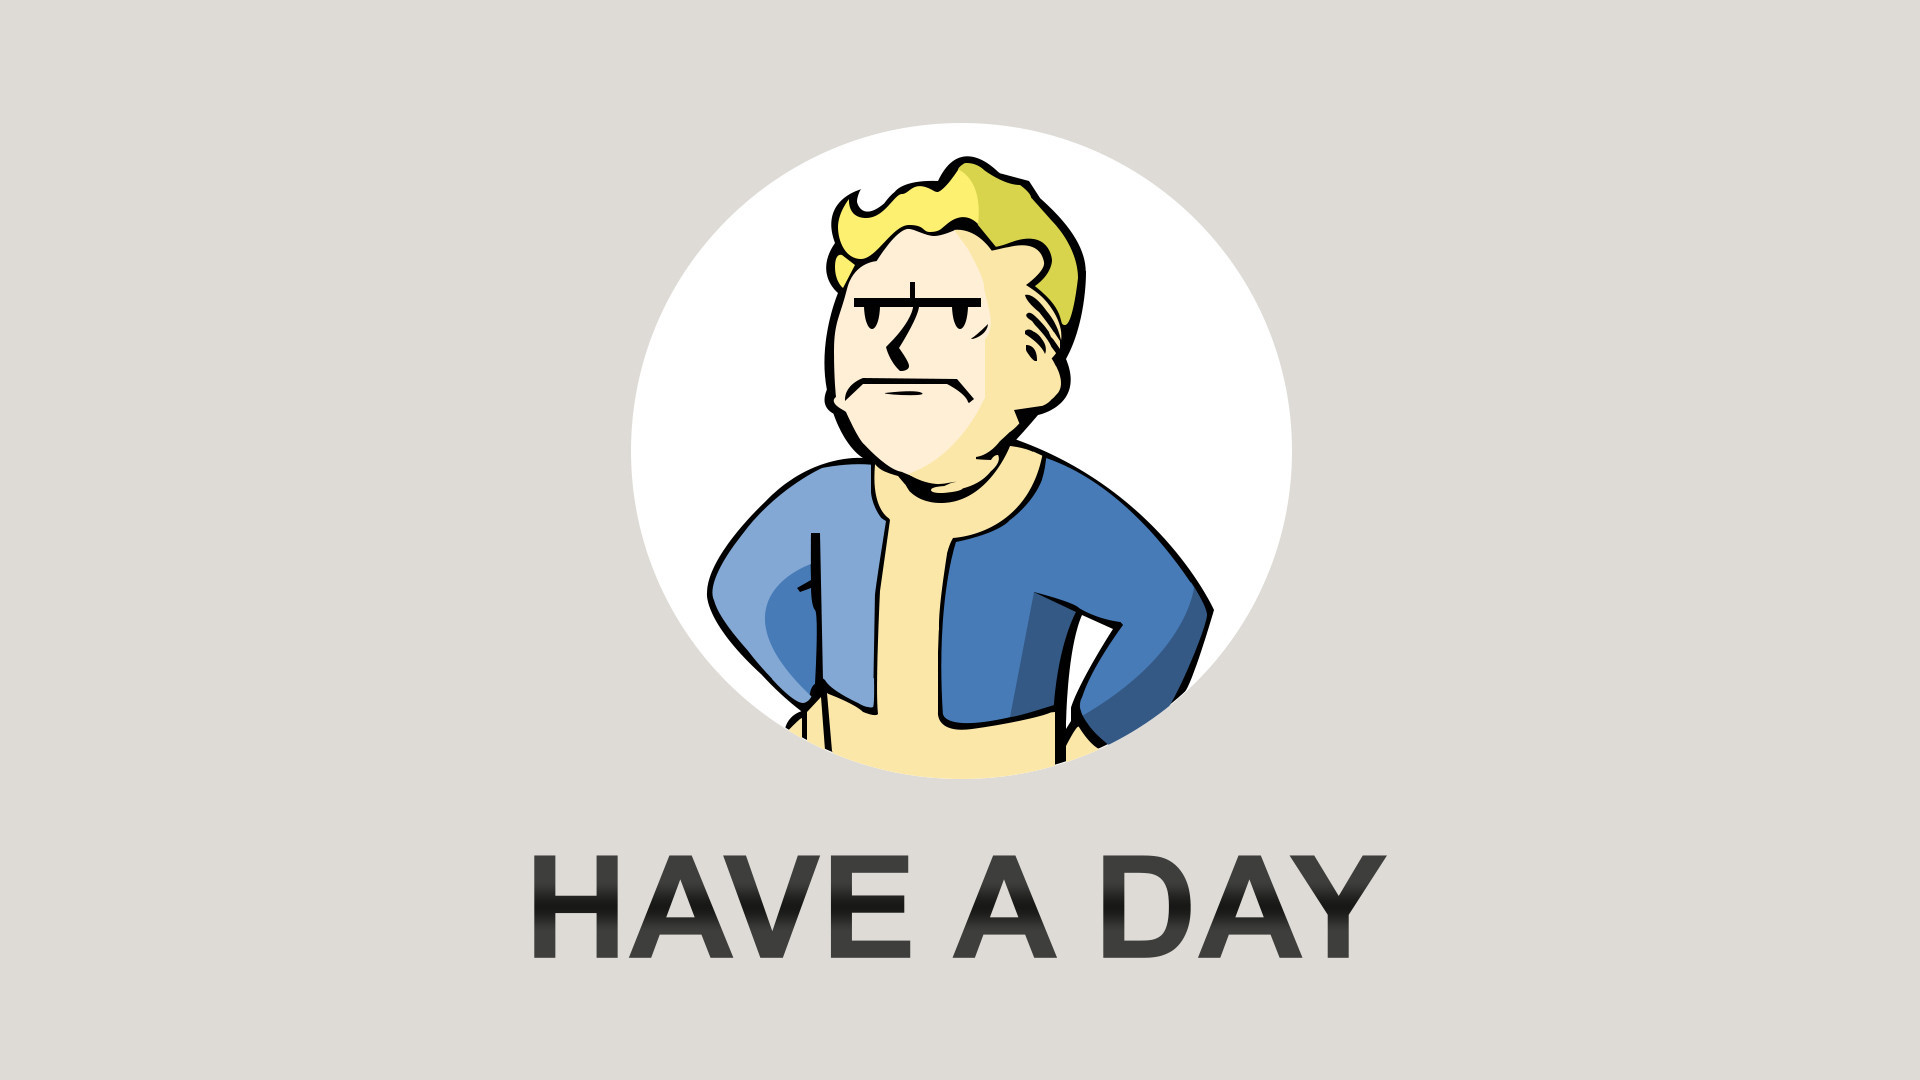 Inspired by my previous wallpaper, the Vault Boy [1920 x 1080] [x-post  /r/gaming] …